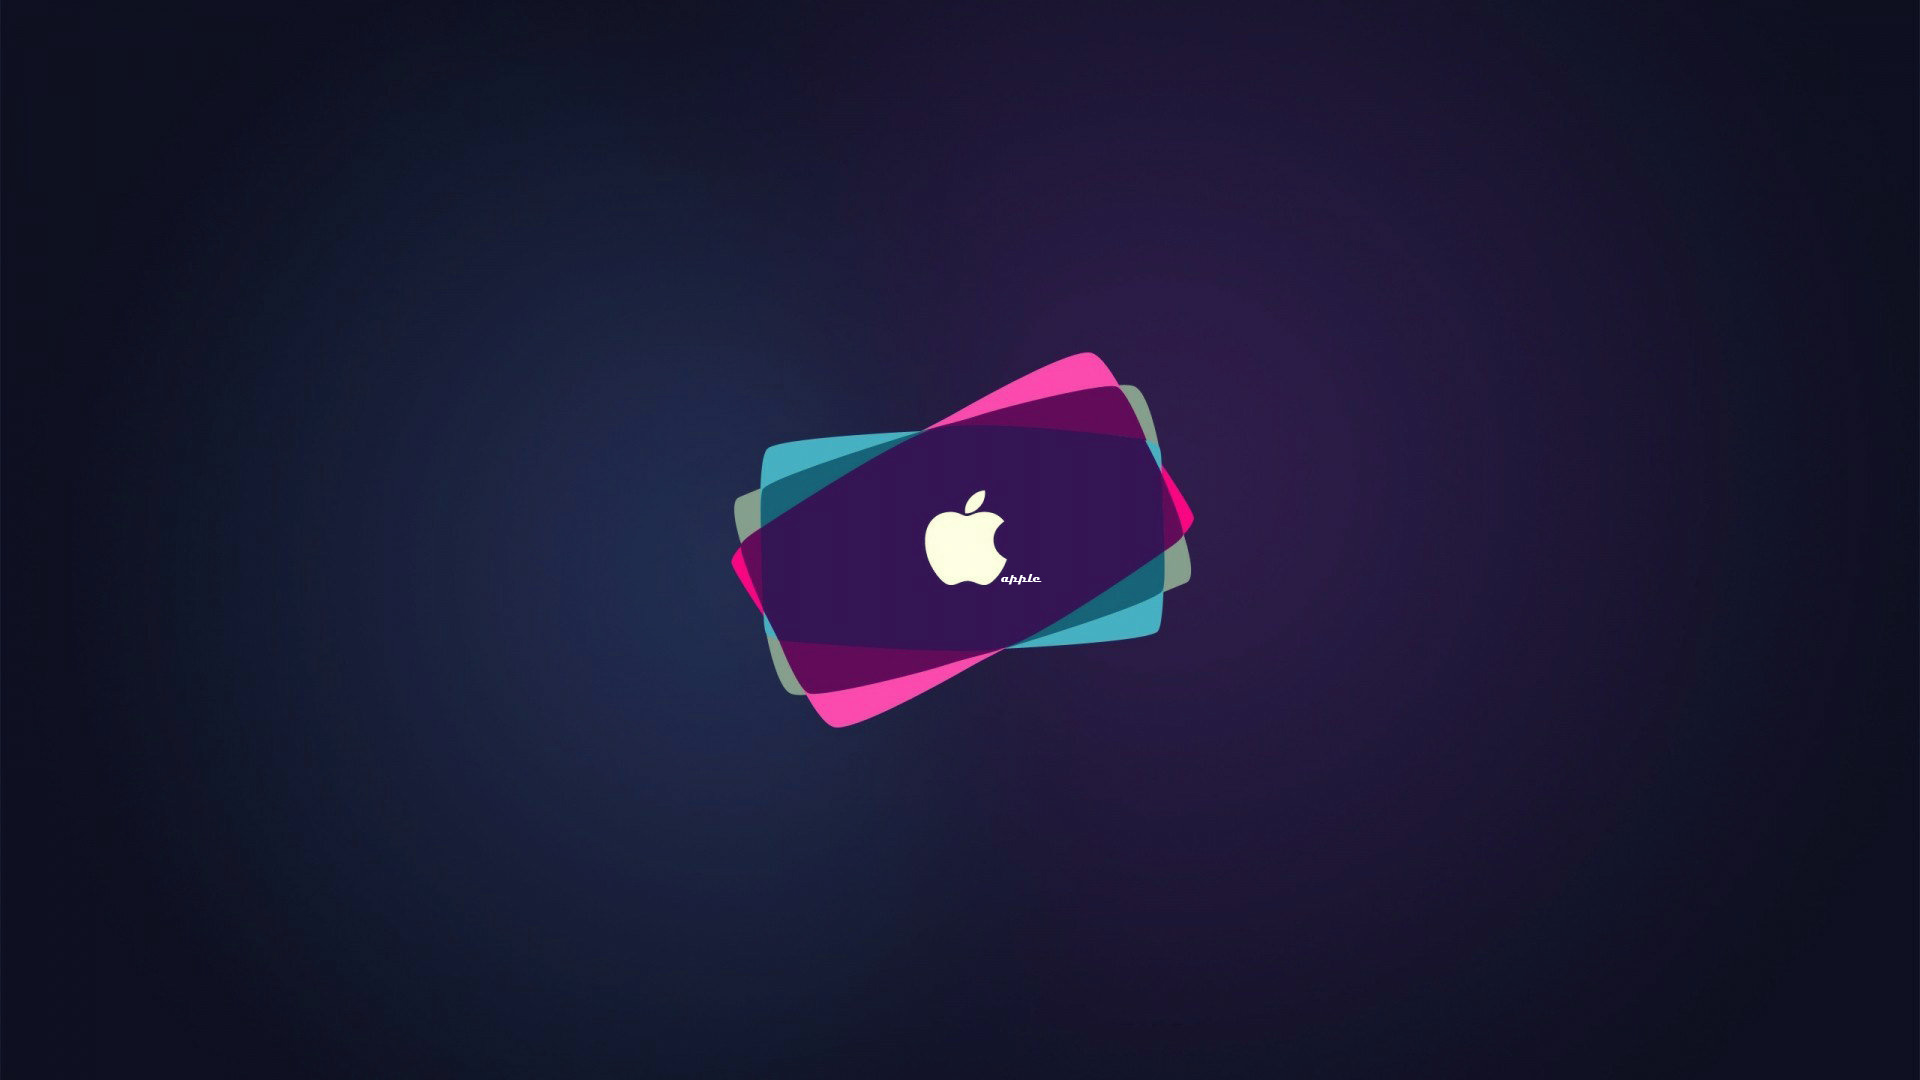 Weekly Wallpaper: Show Your Apple Pride